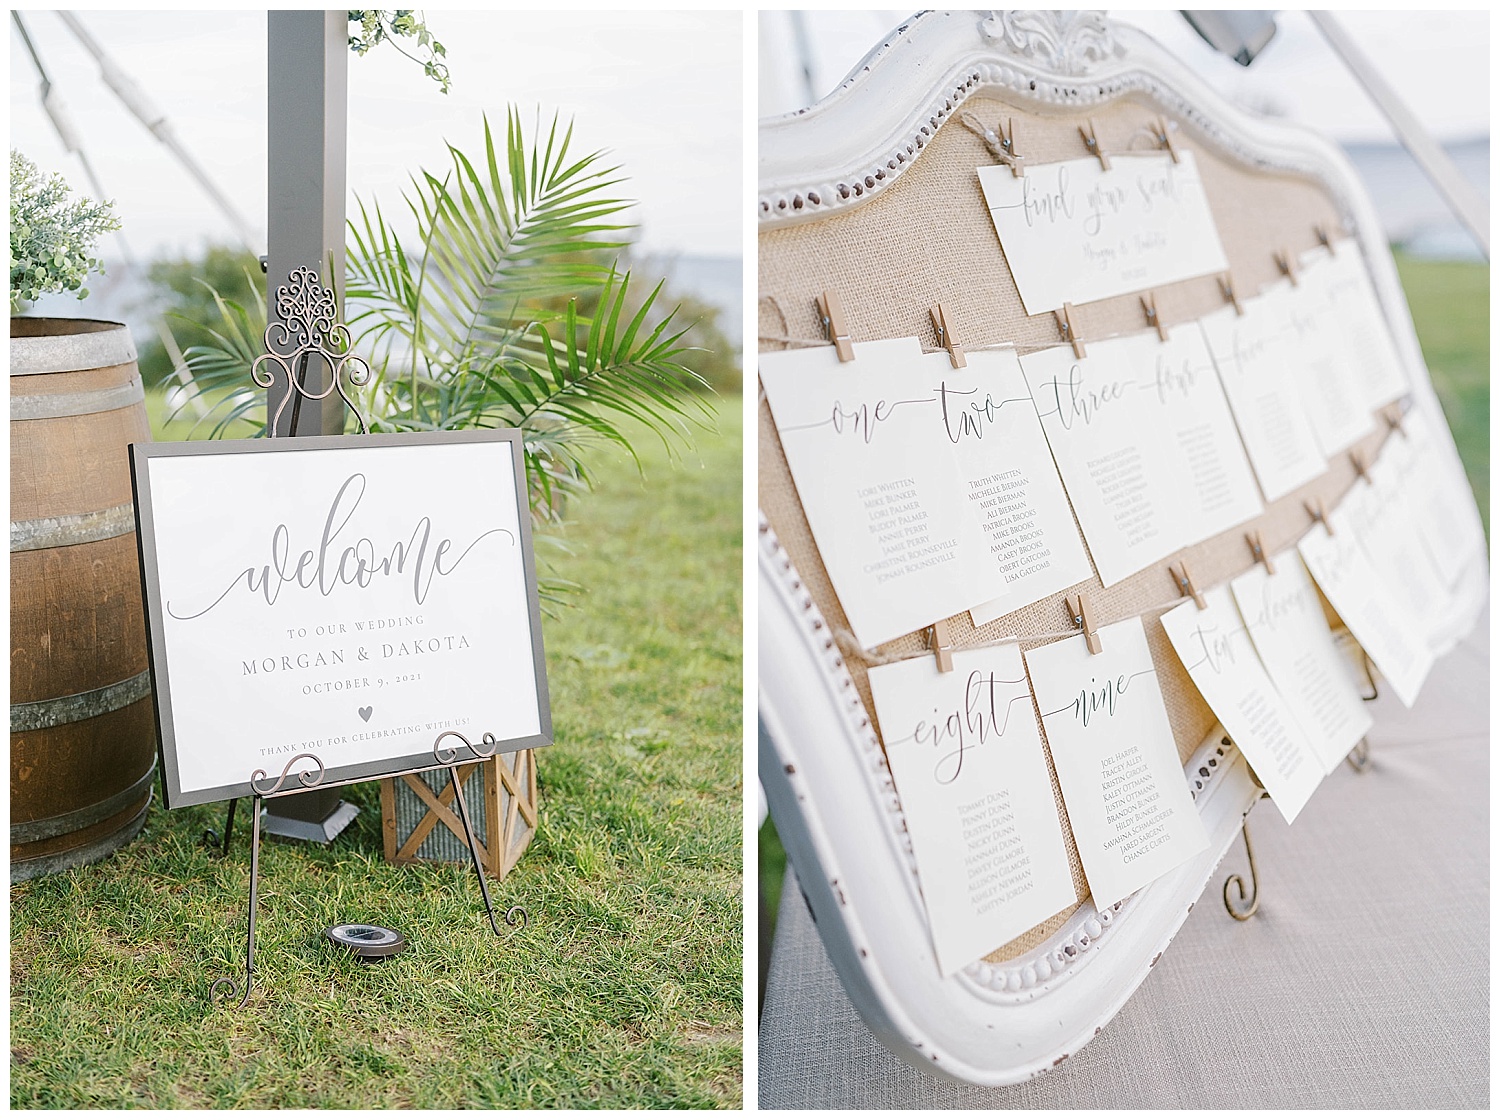 welcome sign and table seating chart at wedding